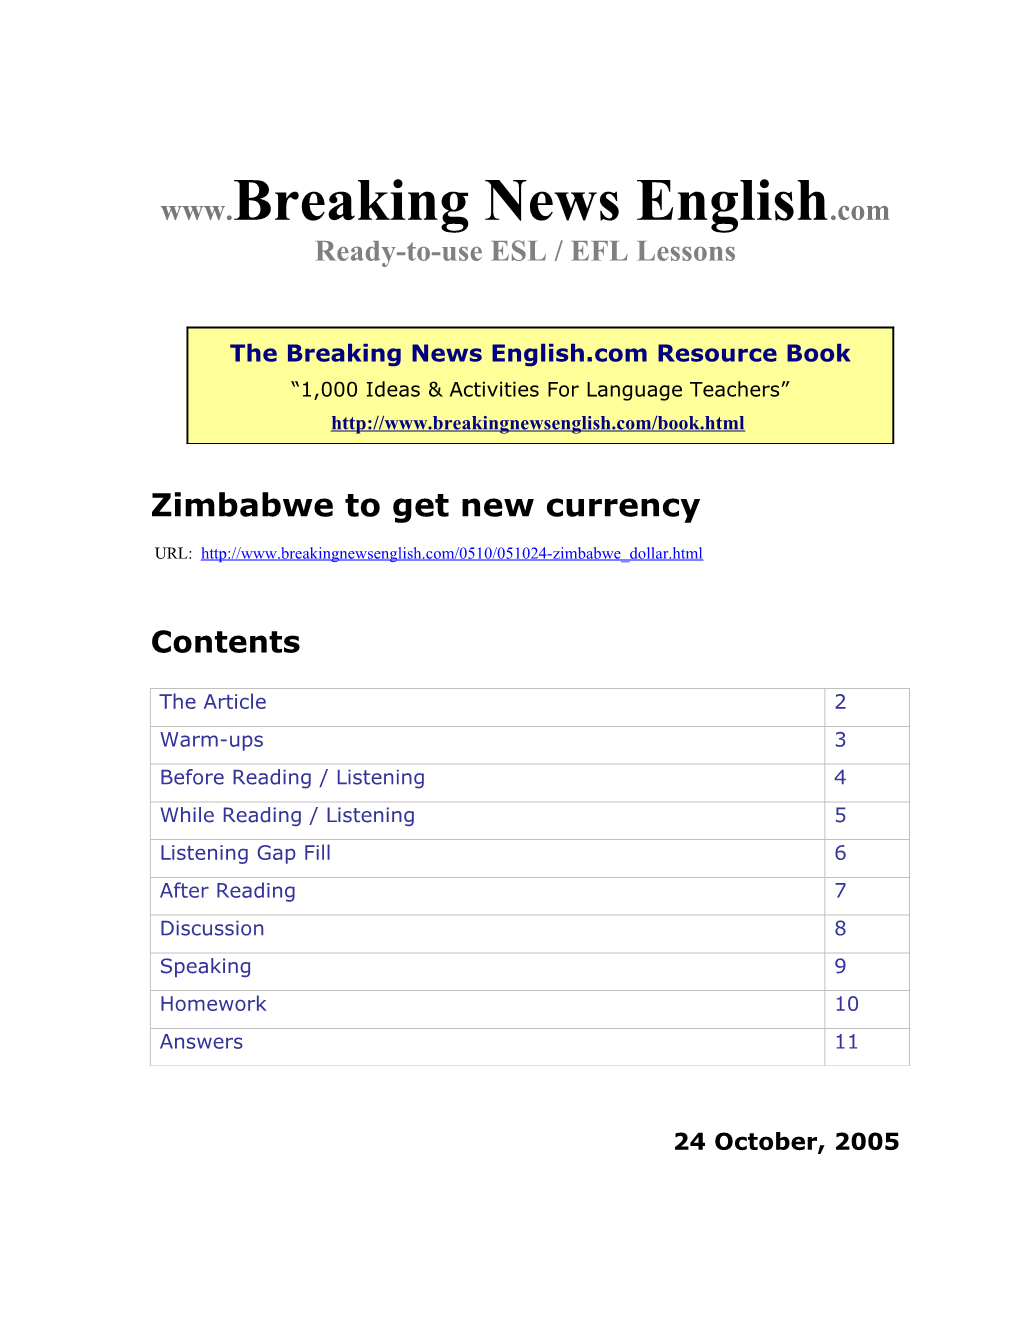 Zimbabwe to Get New Currency